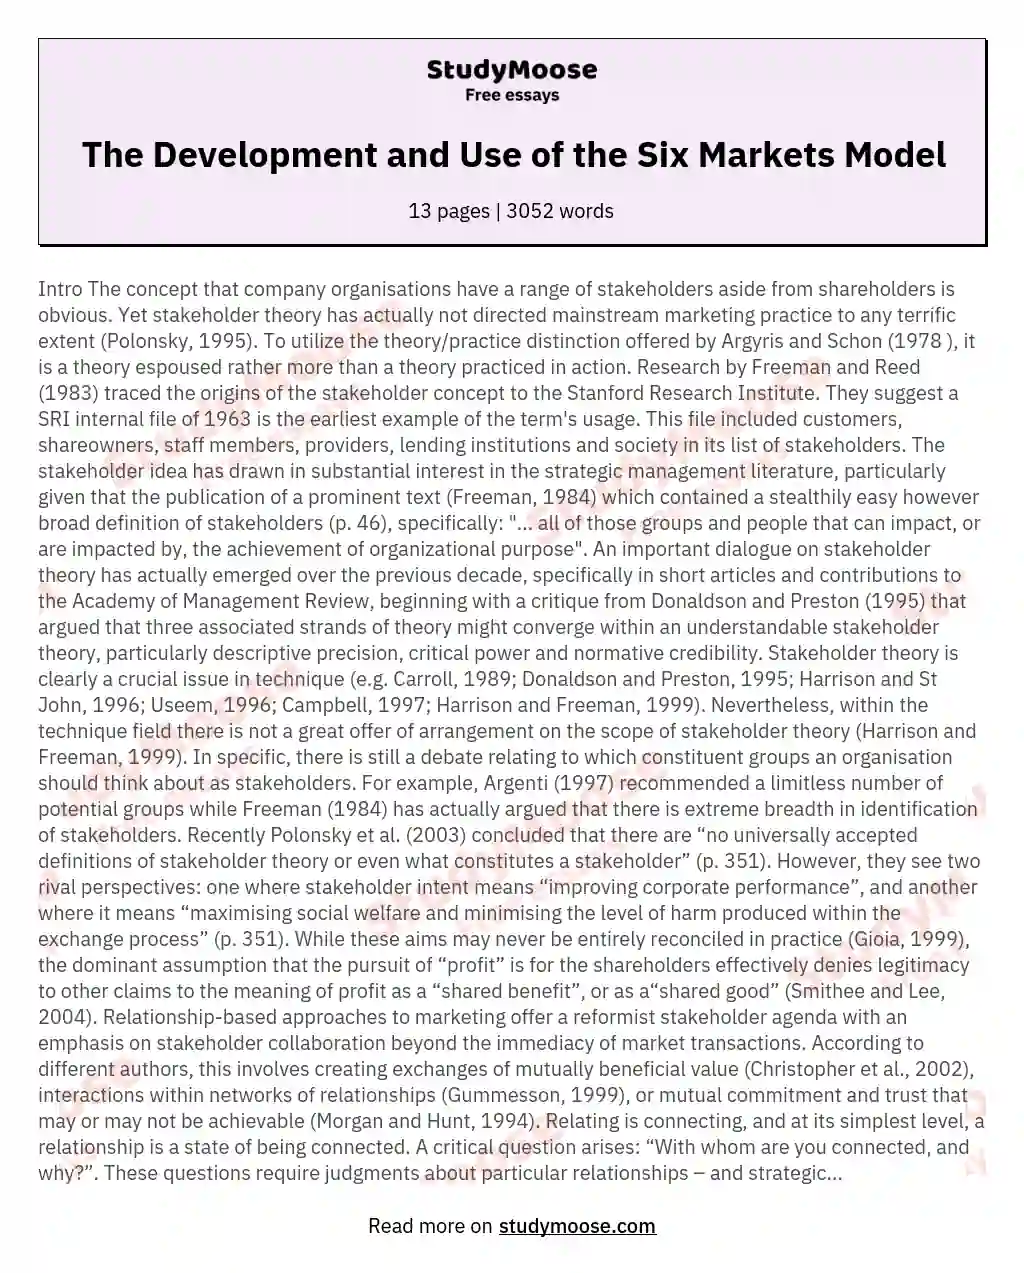 The Development and Use of the Six Markets Model